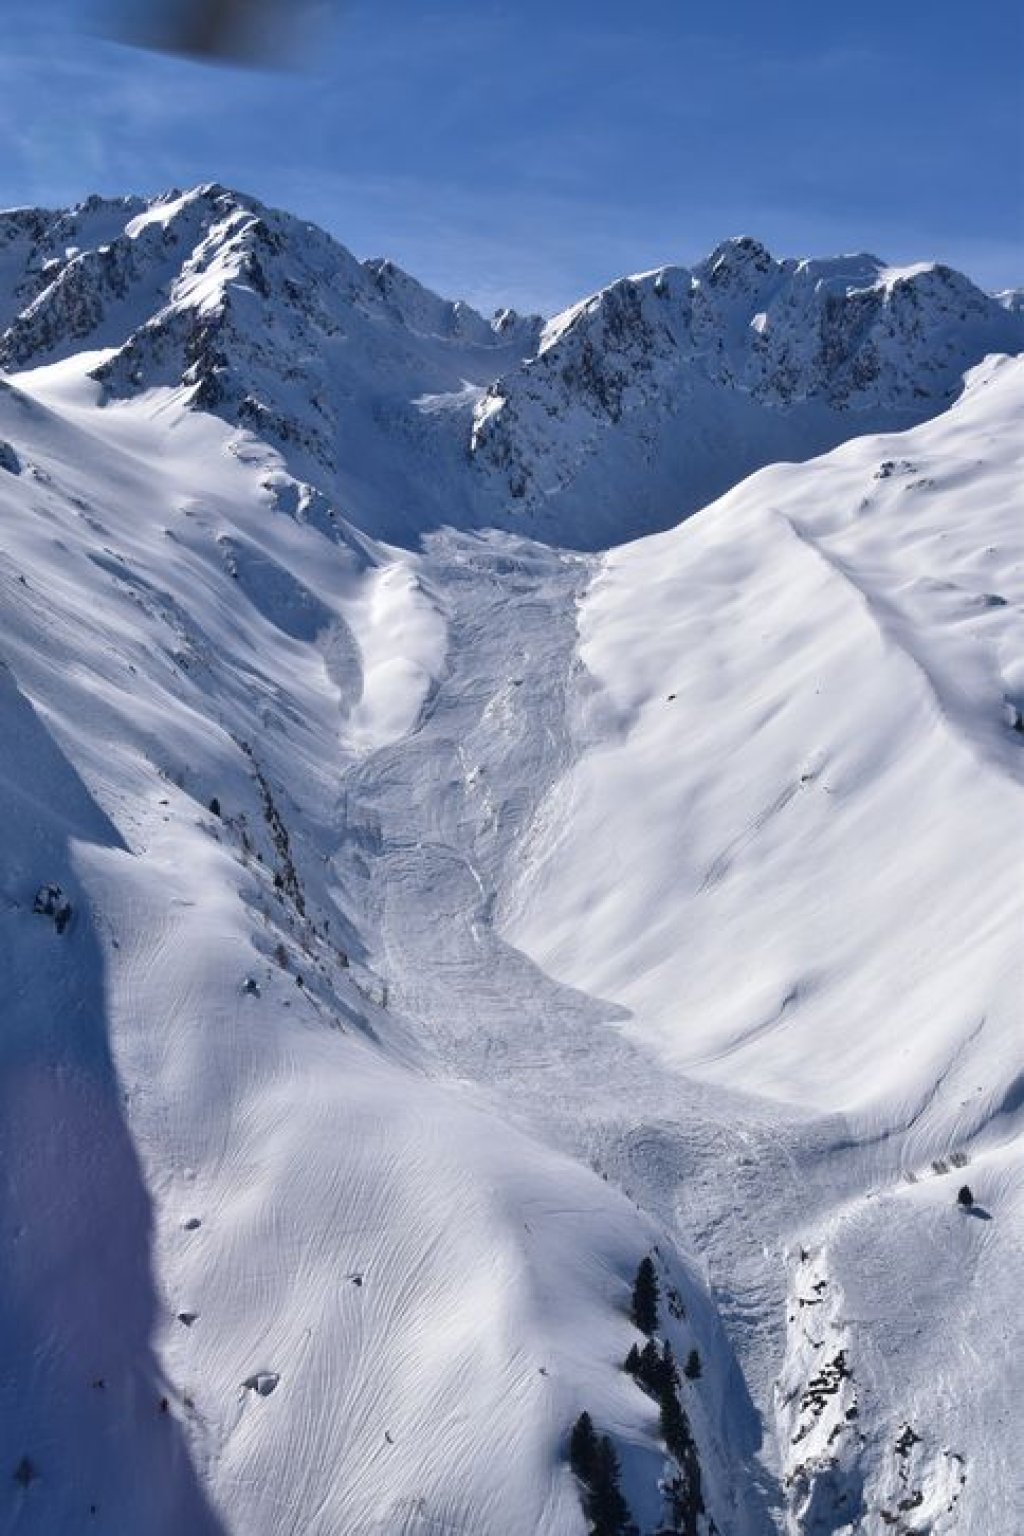 Size 4: Very large avalanche (formerly: large). Length approx. 1-2km, volume 100 000m3.